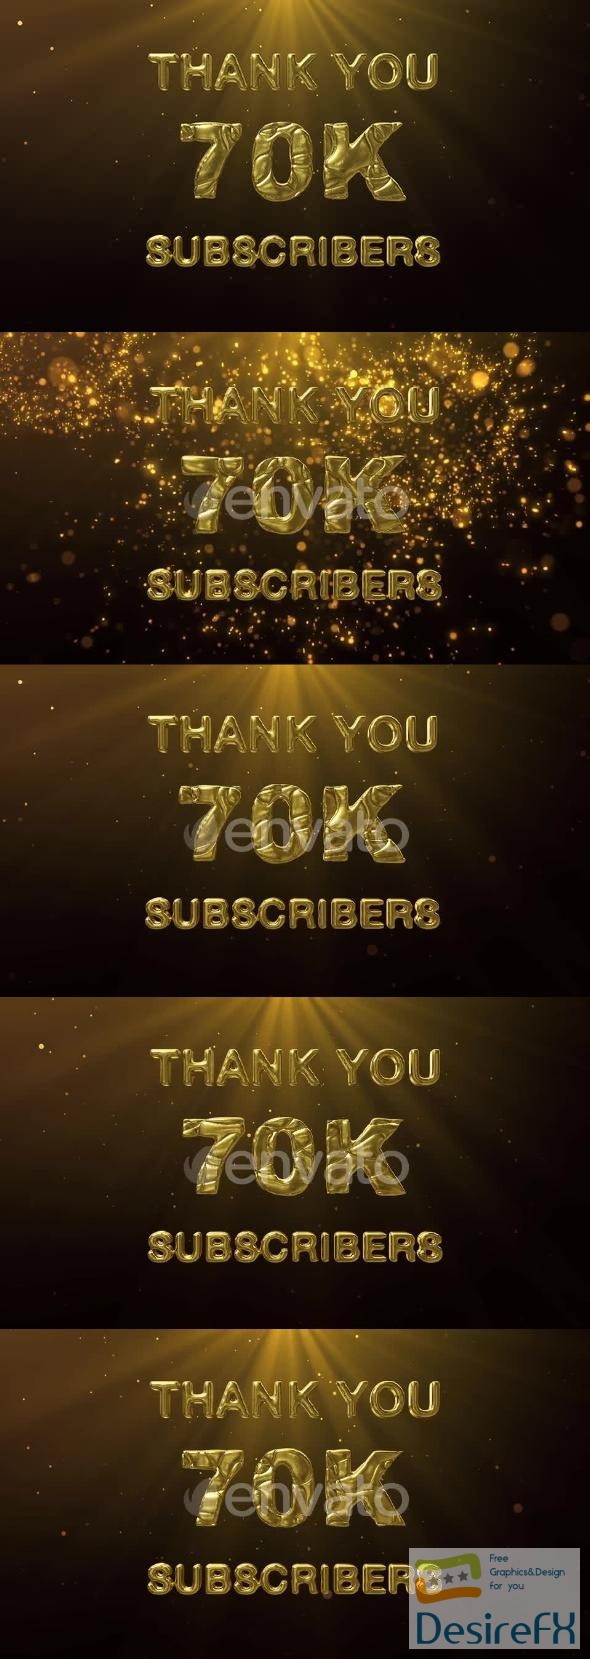 VideoHive 70K Subscribers Celebration Greeting 47552015